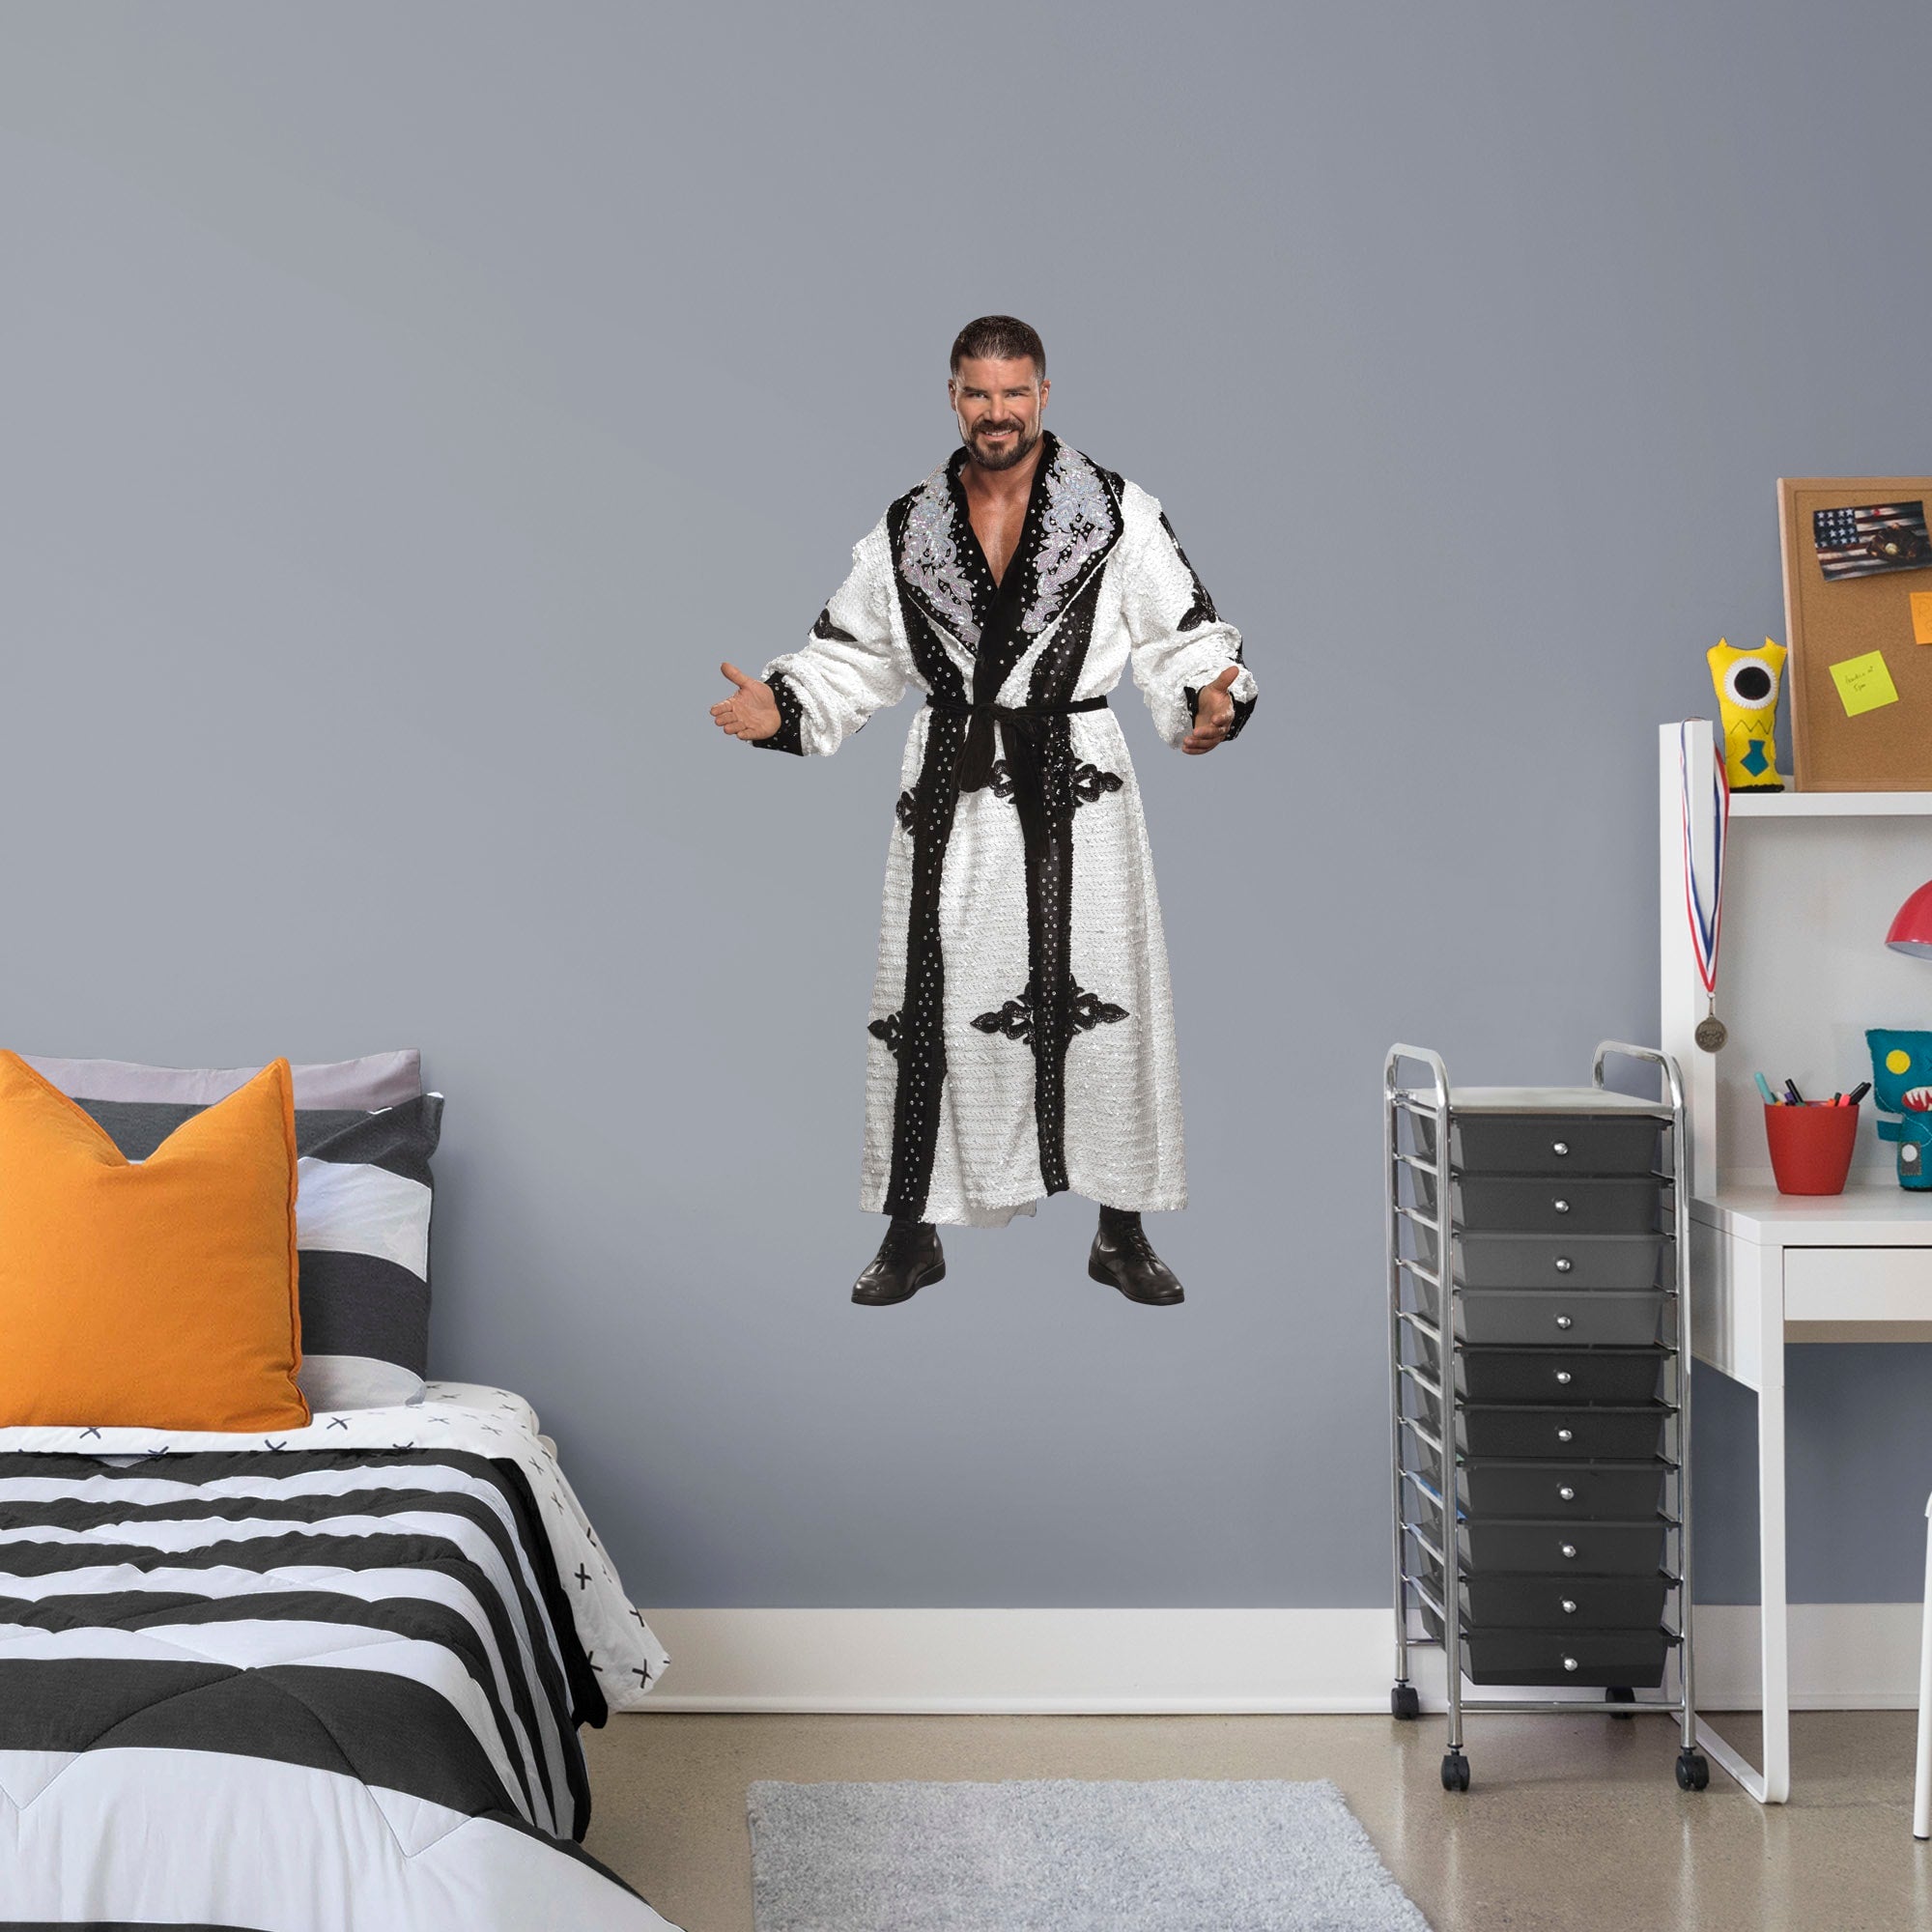 Bobby Roode for WWE - Officially Licensed Removable Wall Decal Giant Superstar + 2 Decals (28"W x 51"H) by Fathead | Vinyl